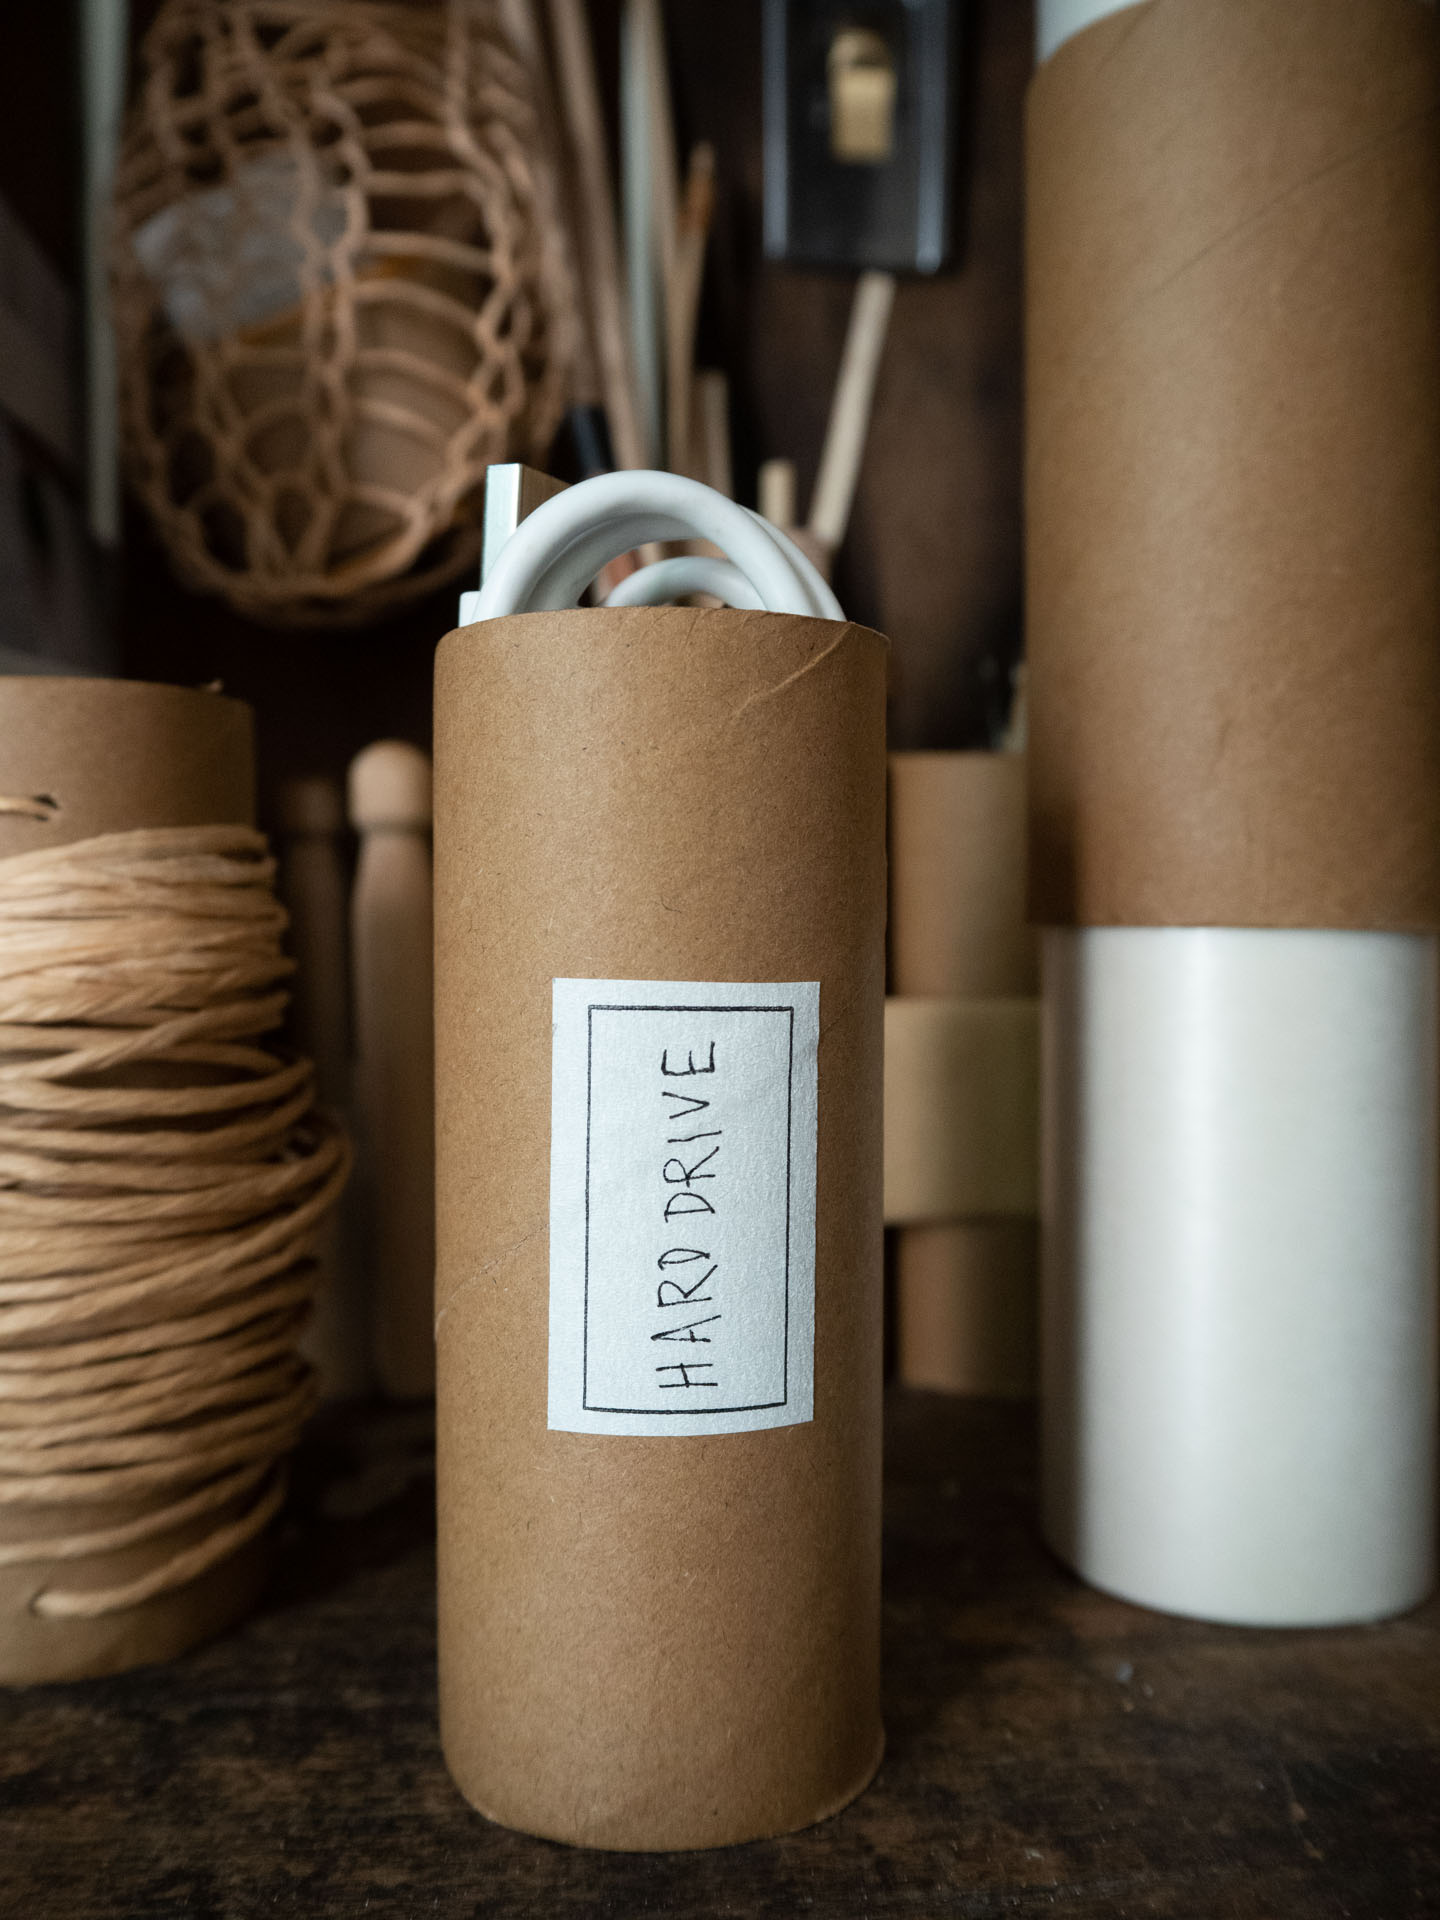 organizing with toilet paper rolls. – Reading My Tea Leaves – Slow